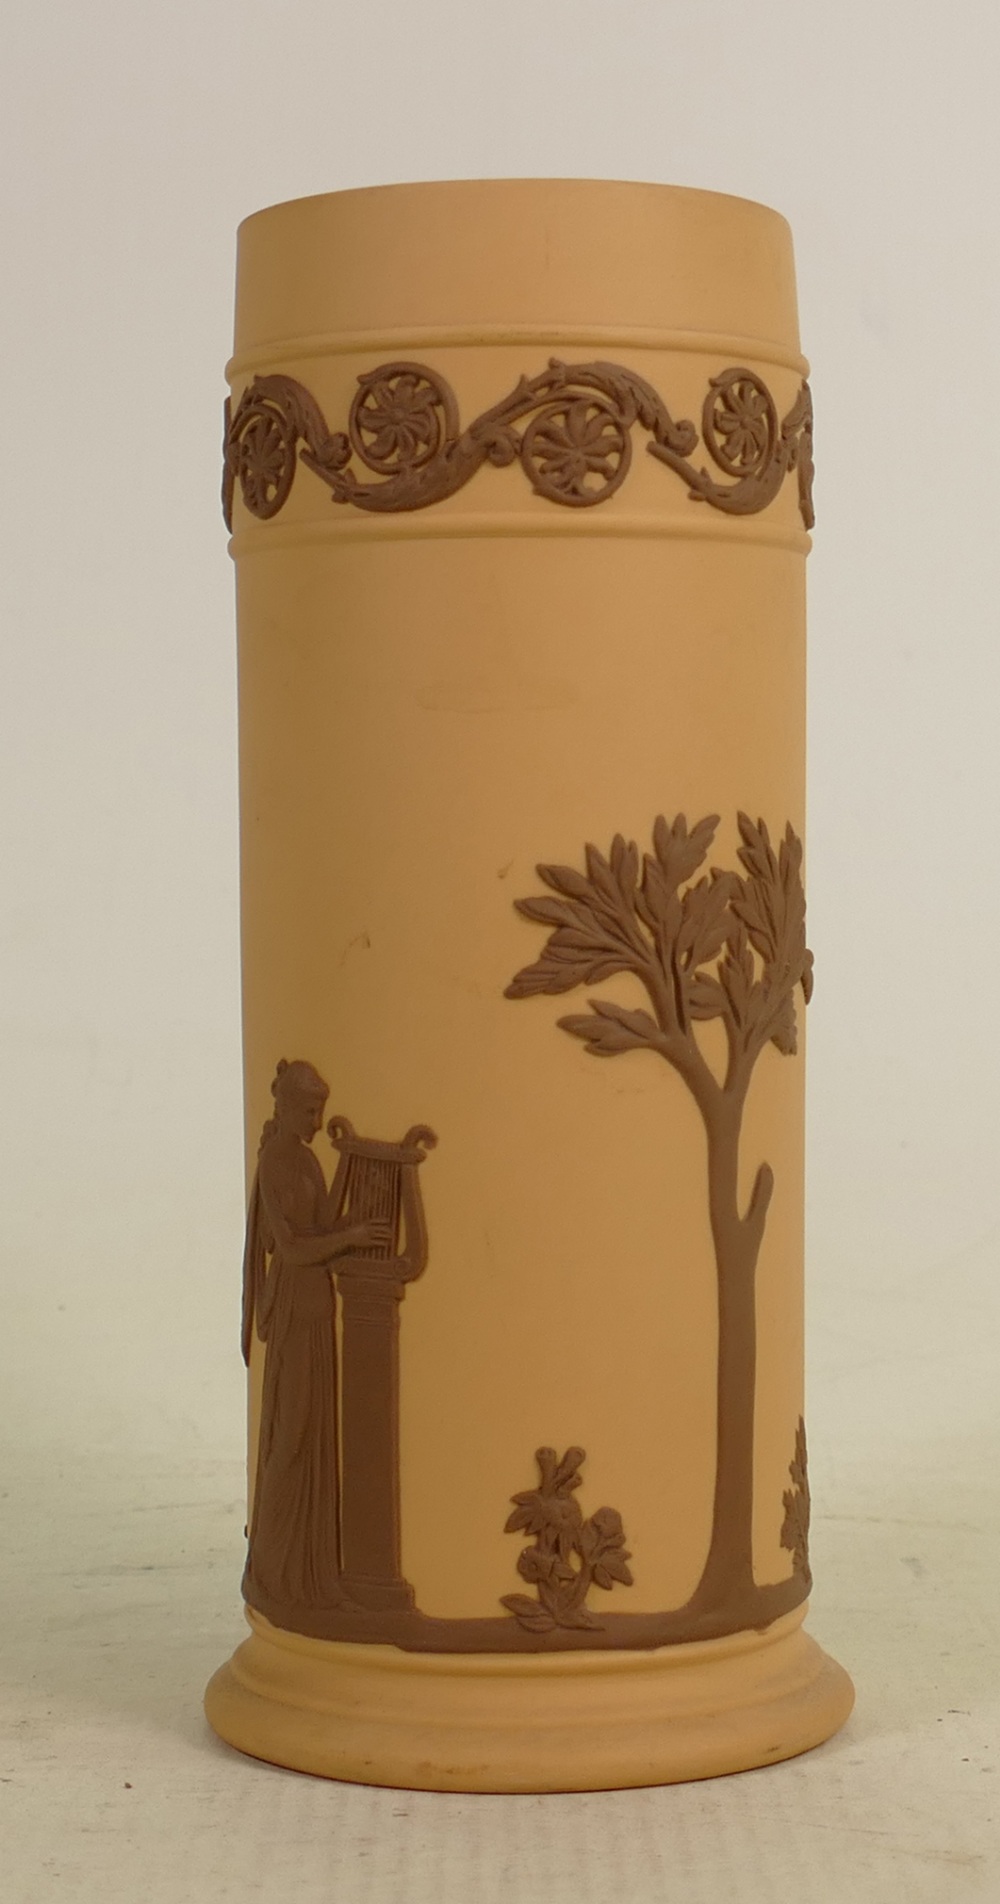 Wedgwood chocolate on cane Muse vase: Dated 1986, height 17cm.